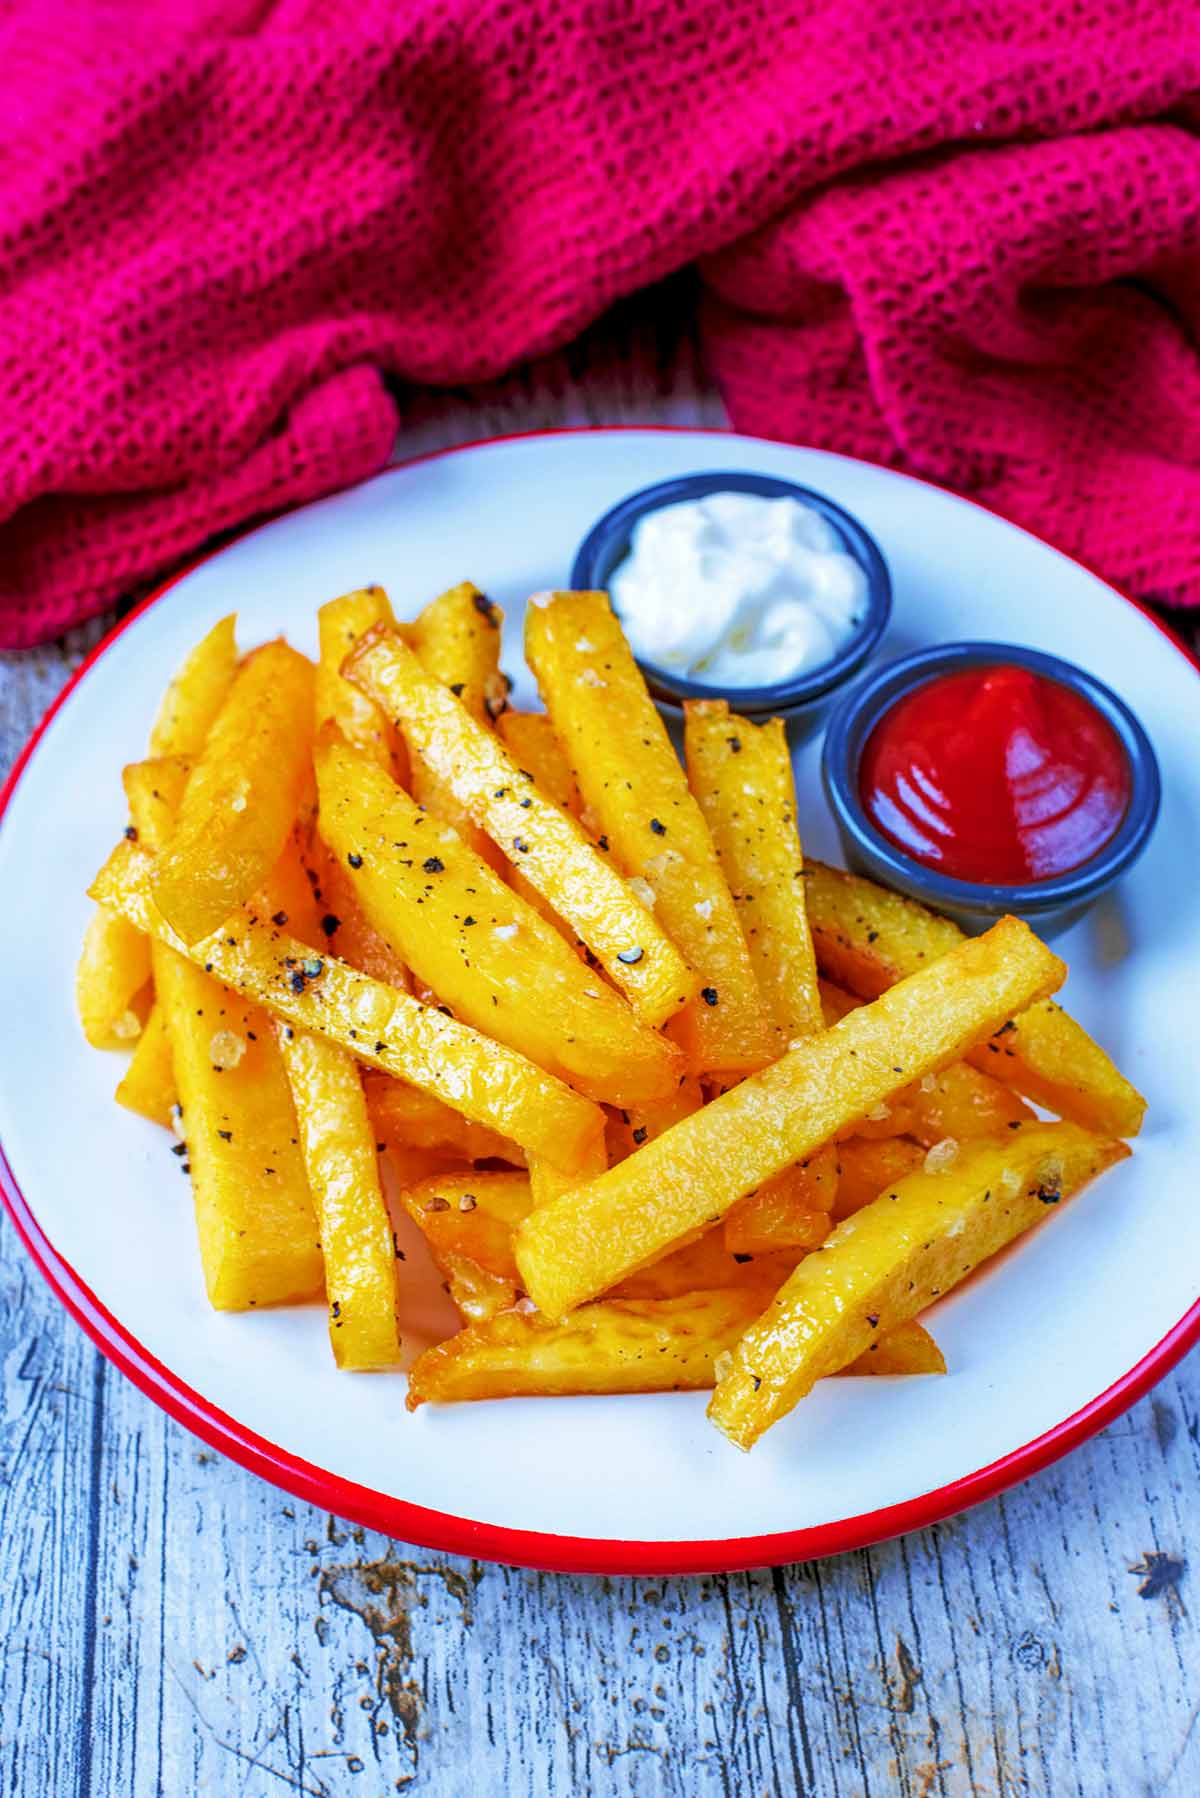 Polenta chips on a red rimmed plate with two pots of dip.